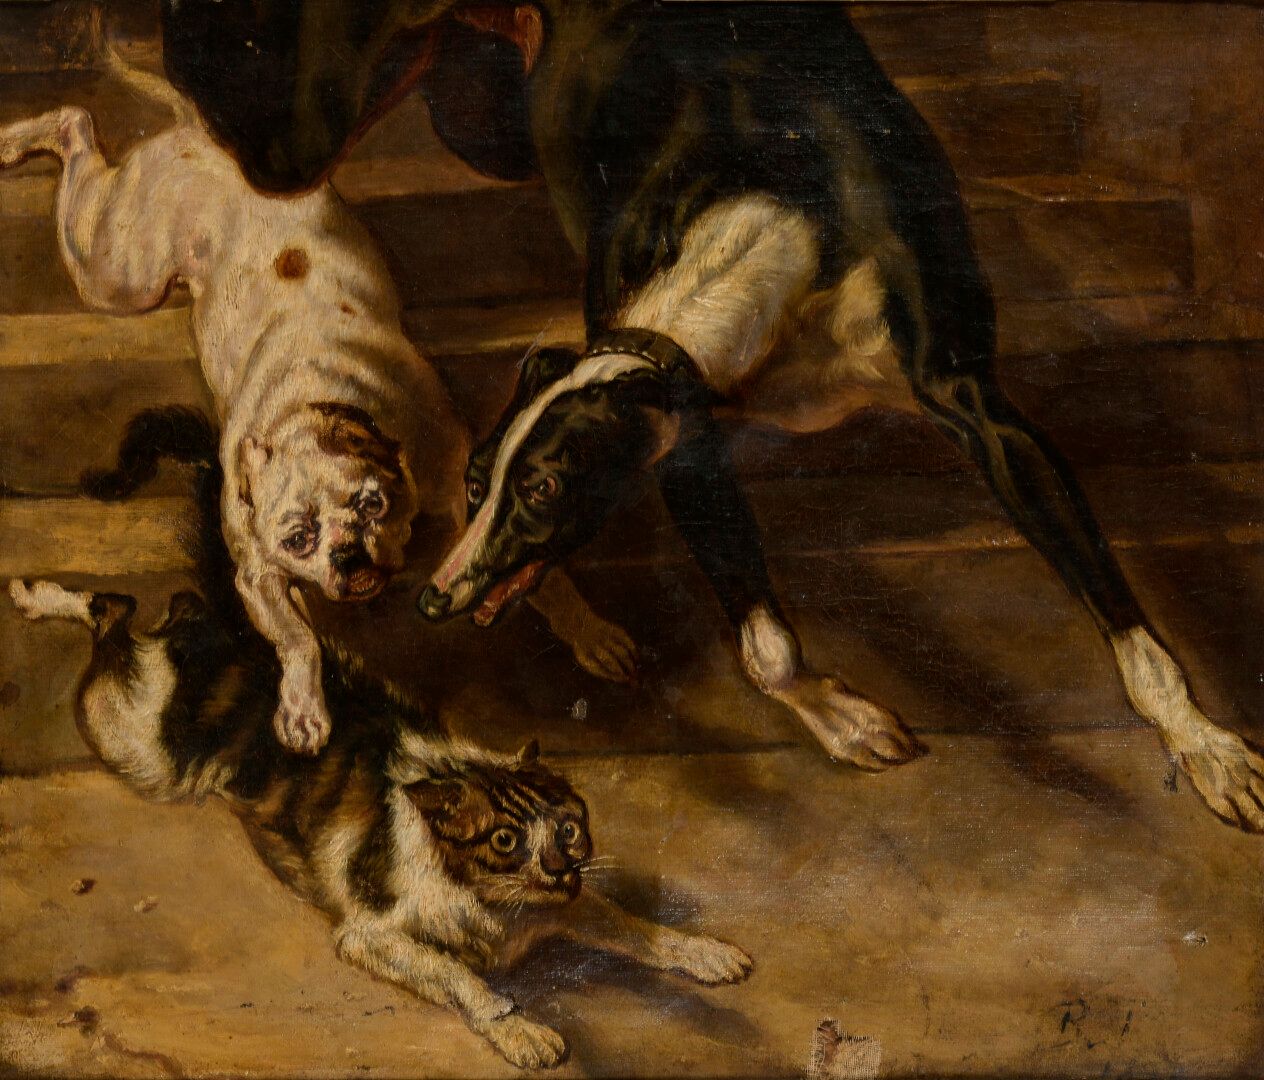 Ecole du XIXe siècle. 19th century school

Dogs chasing a cat

Oil on canvas. Tr&hellip;